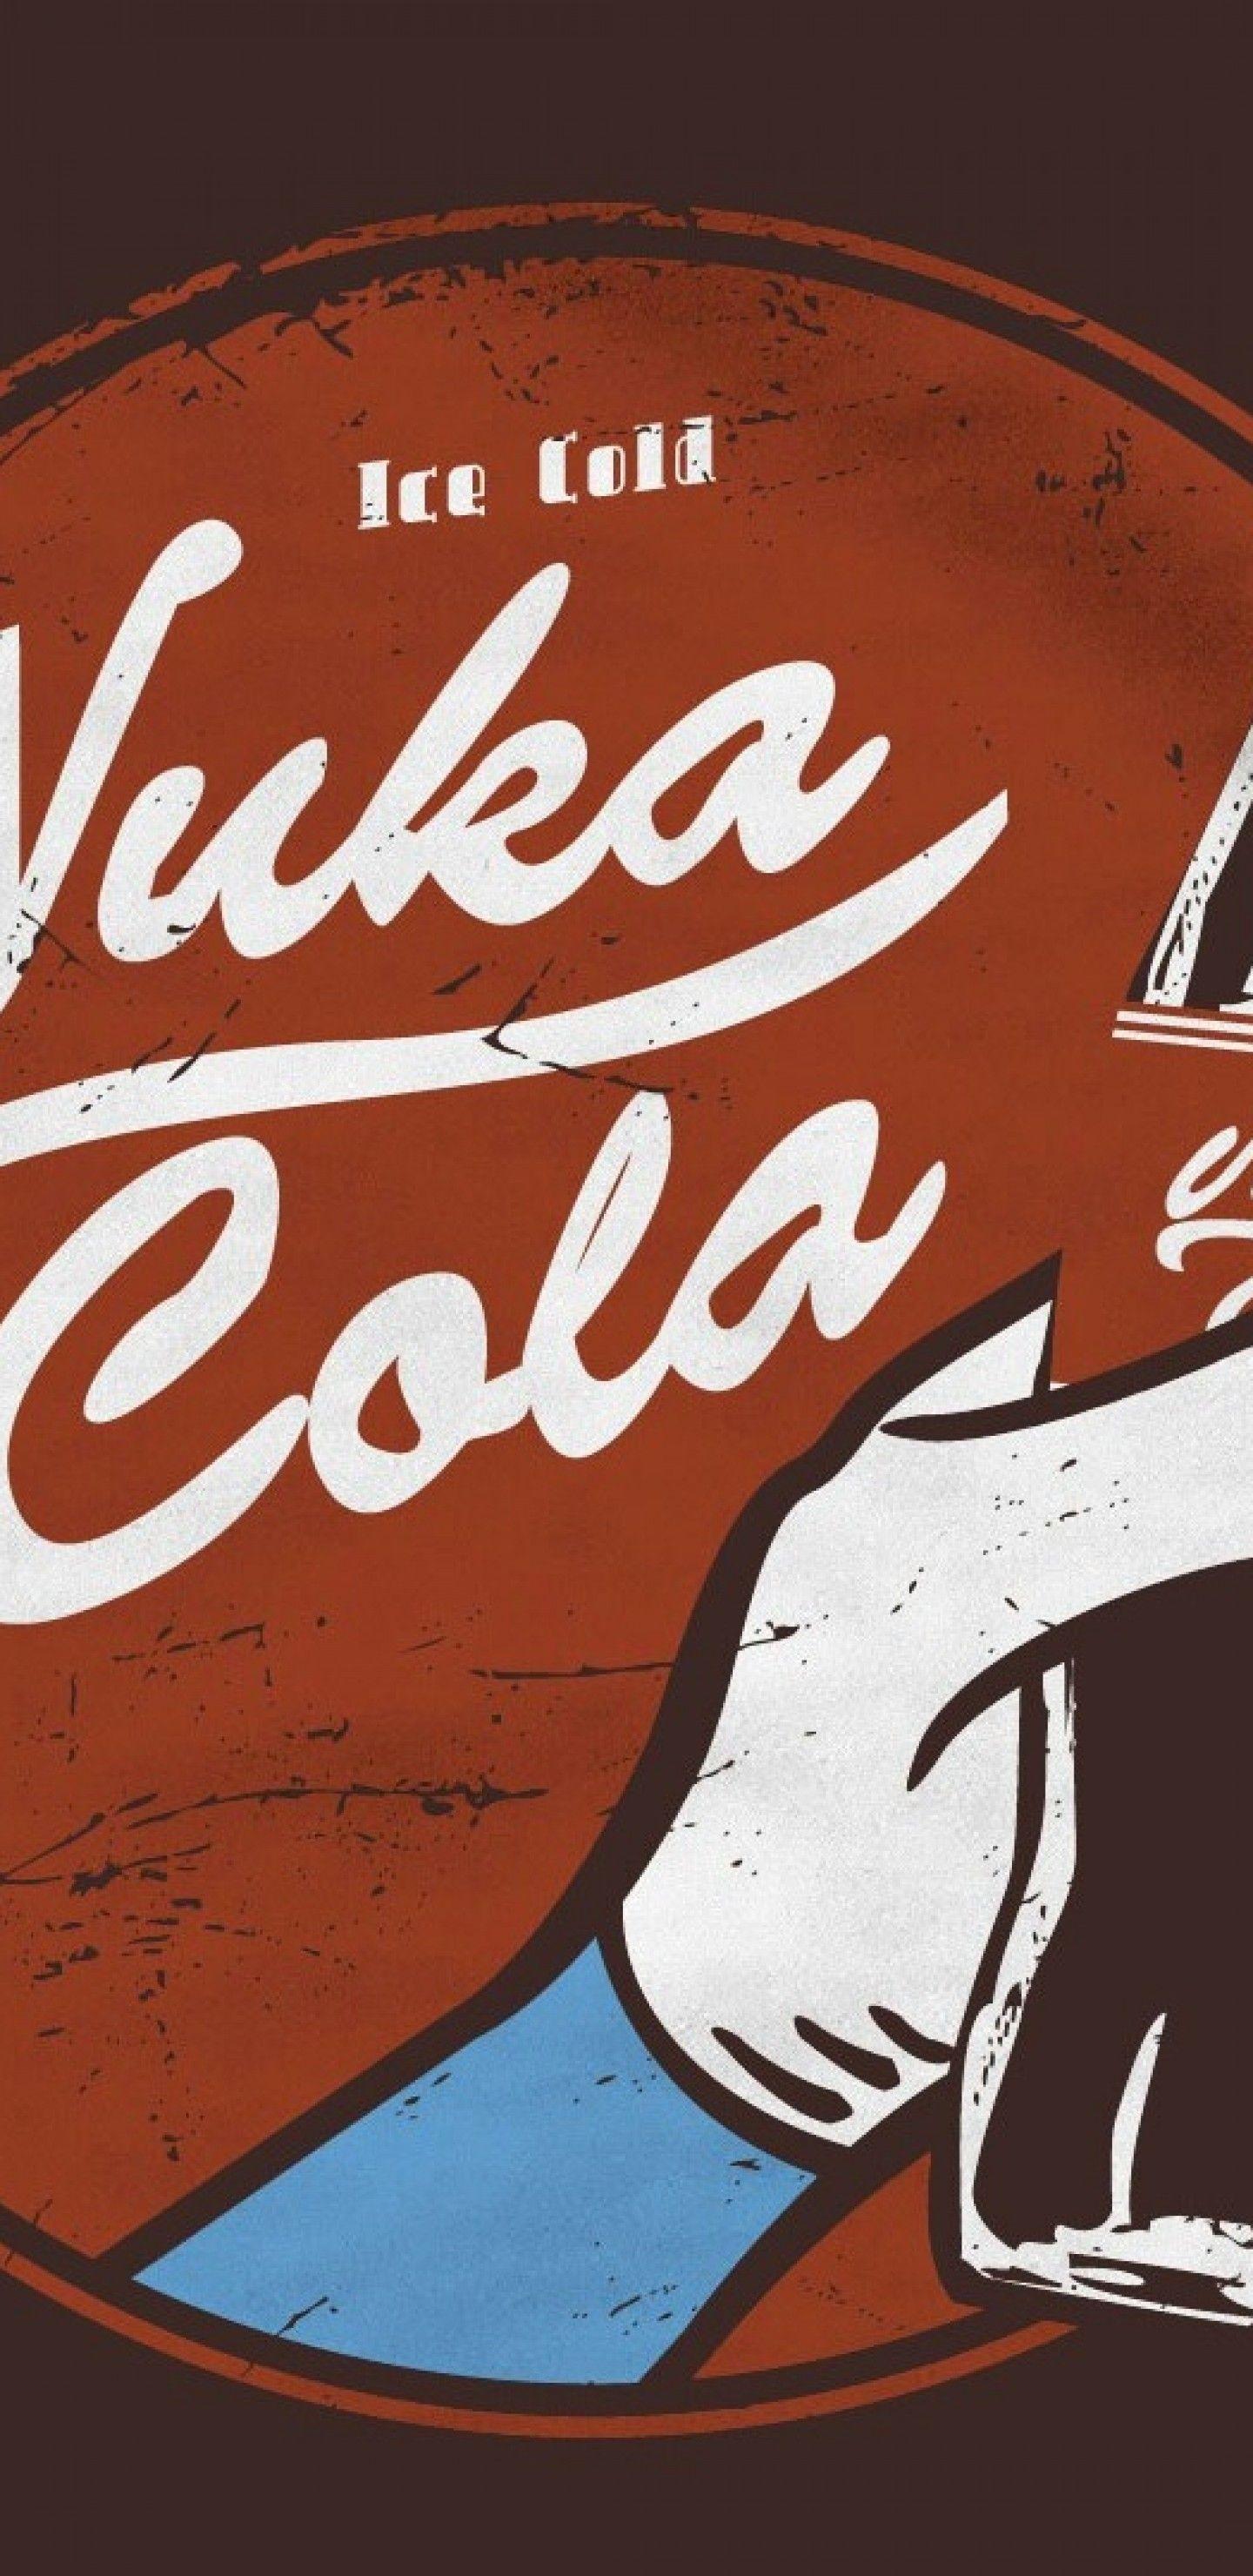 Download 1440x2960 Fallout Nuka Cola Wallpaper For Samsung